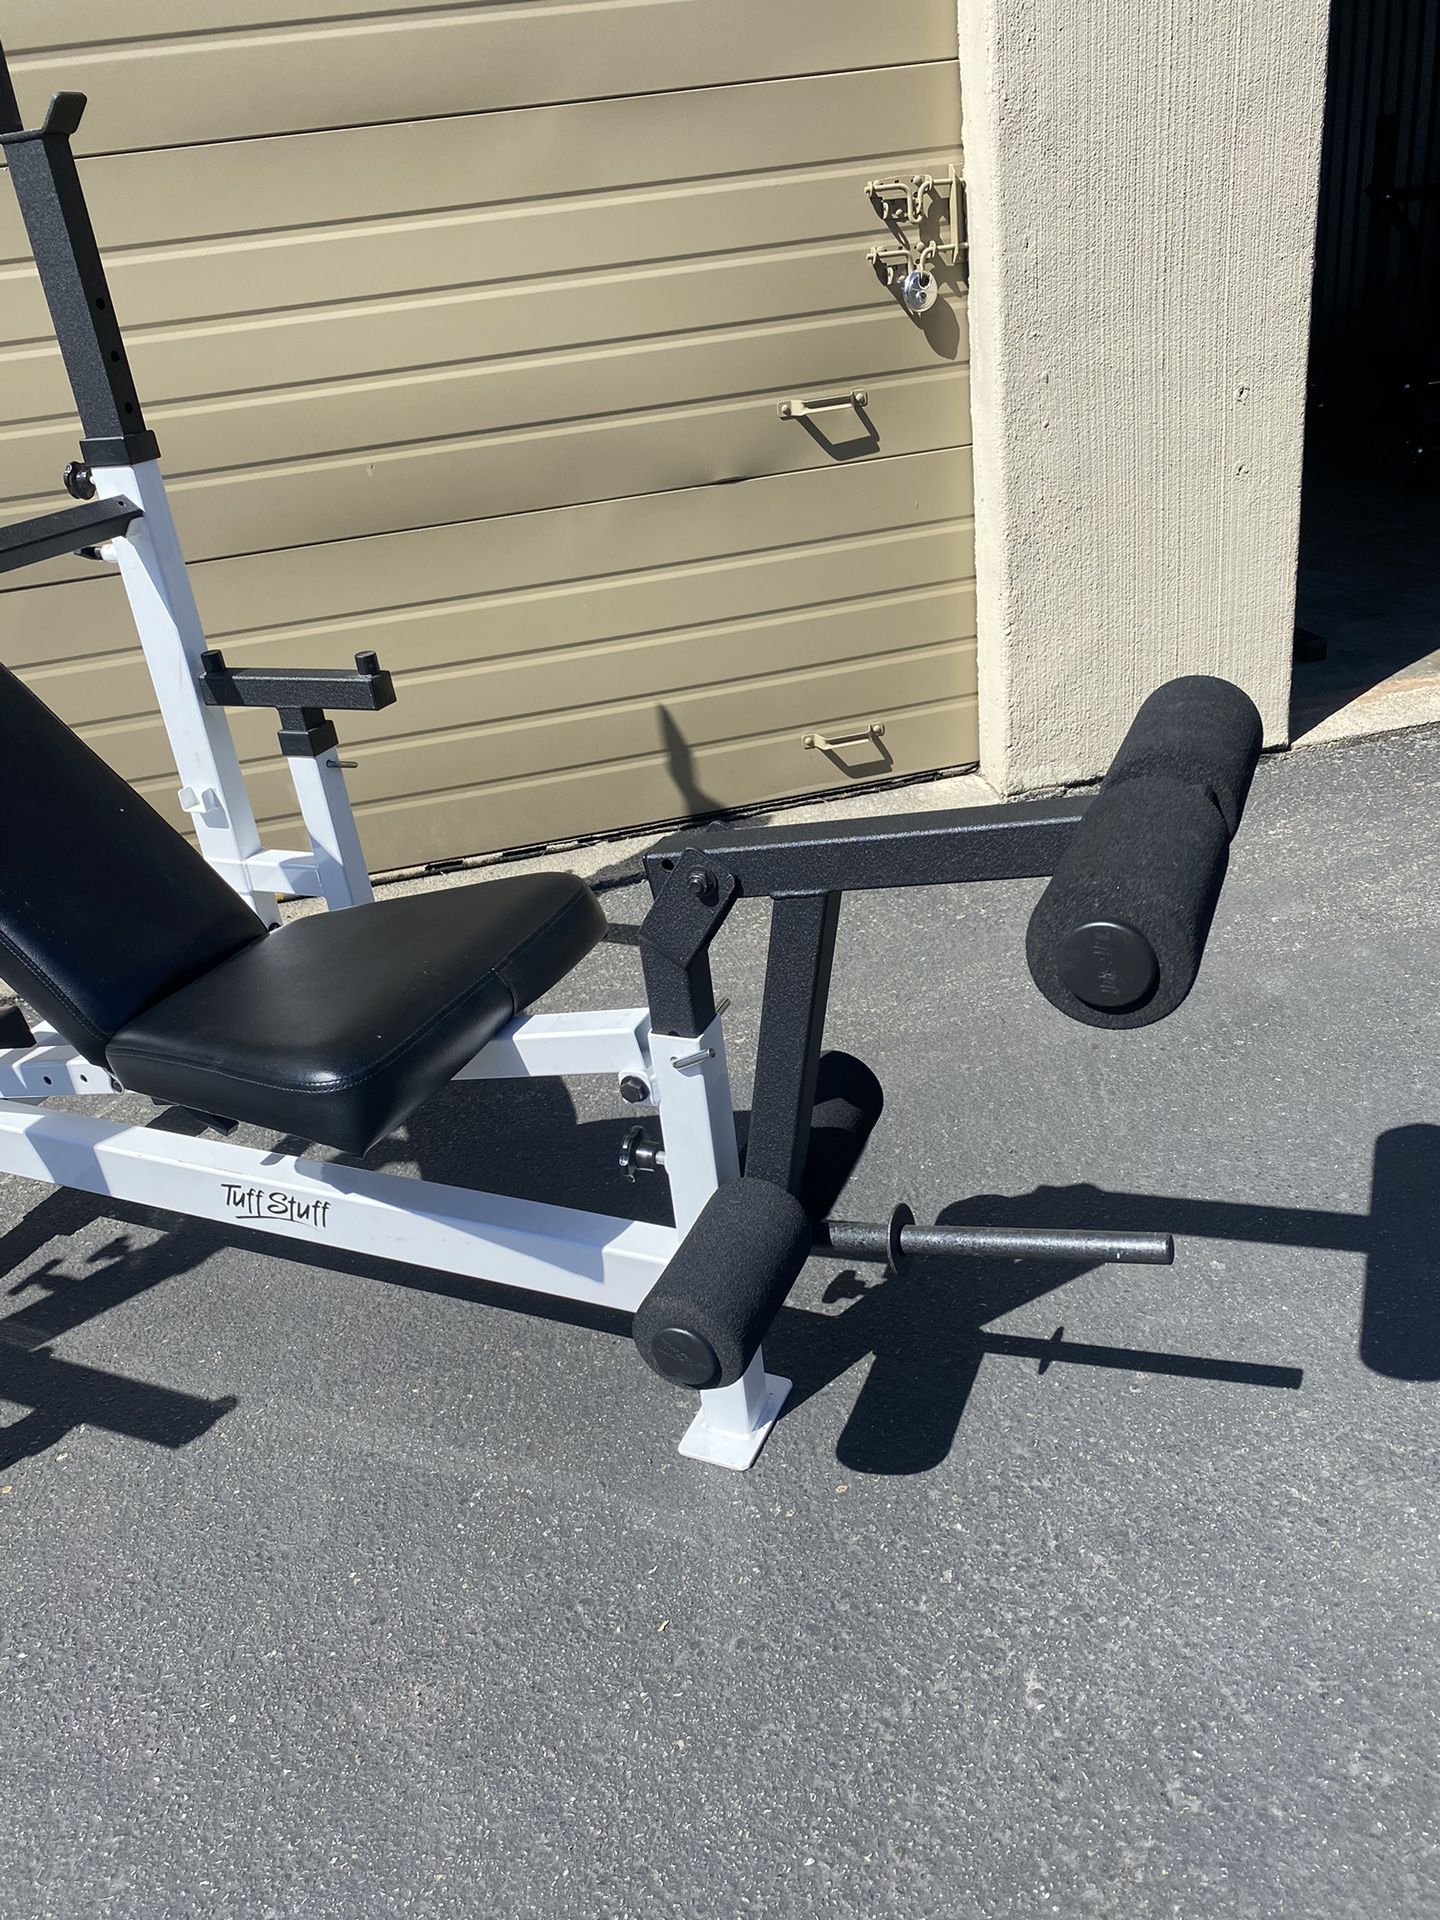 Tuff Stuff Weight Bench Press, Leg Extension for Sale in Kent, WA - OfferUp